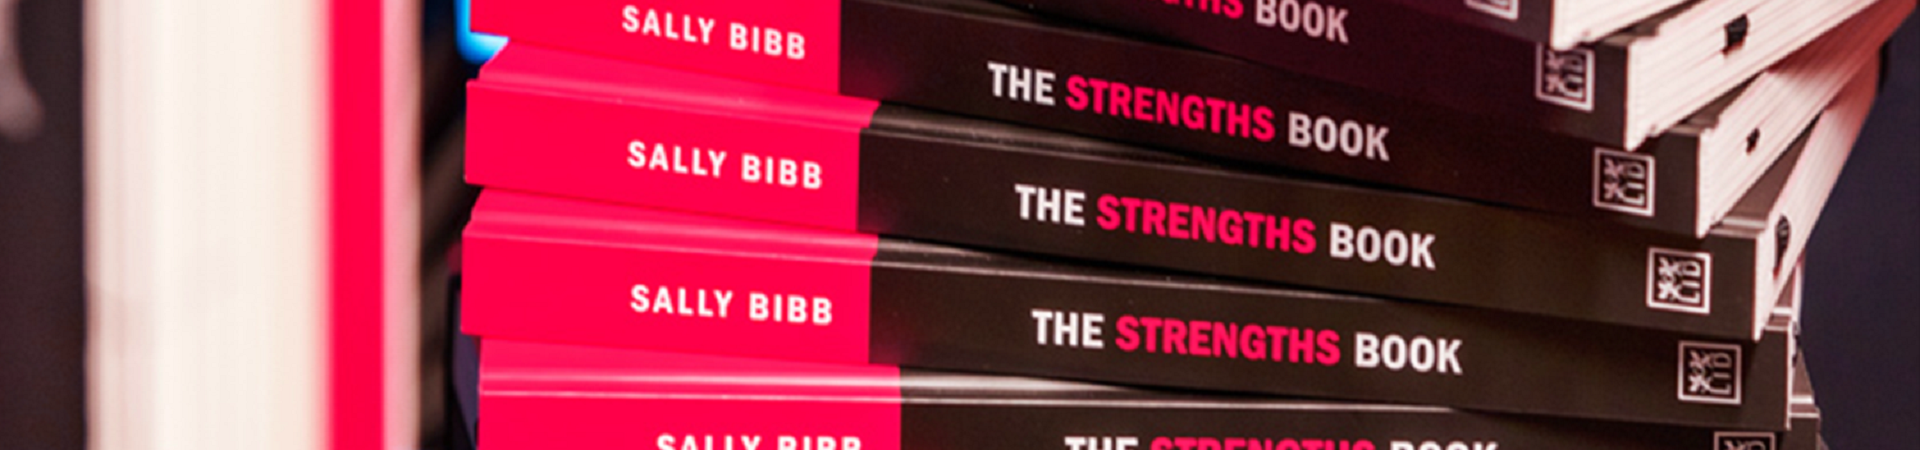 sally bibb the strengths book cover detail